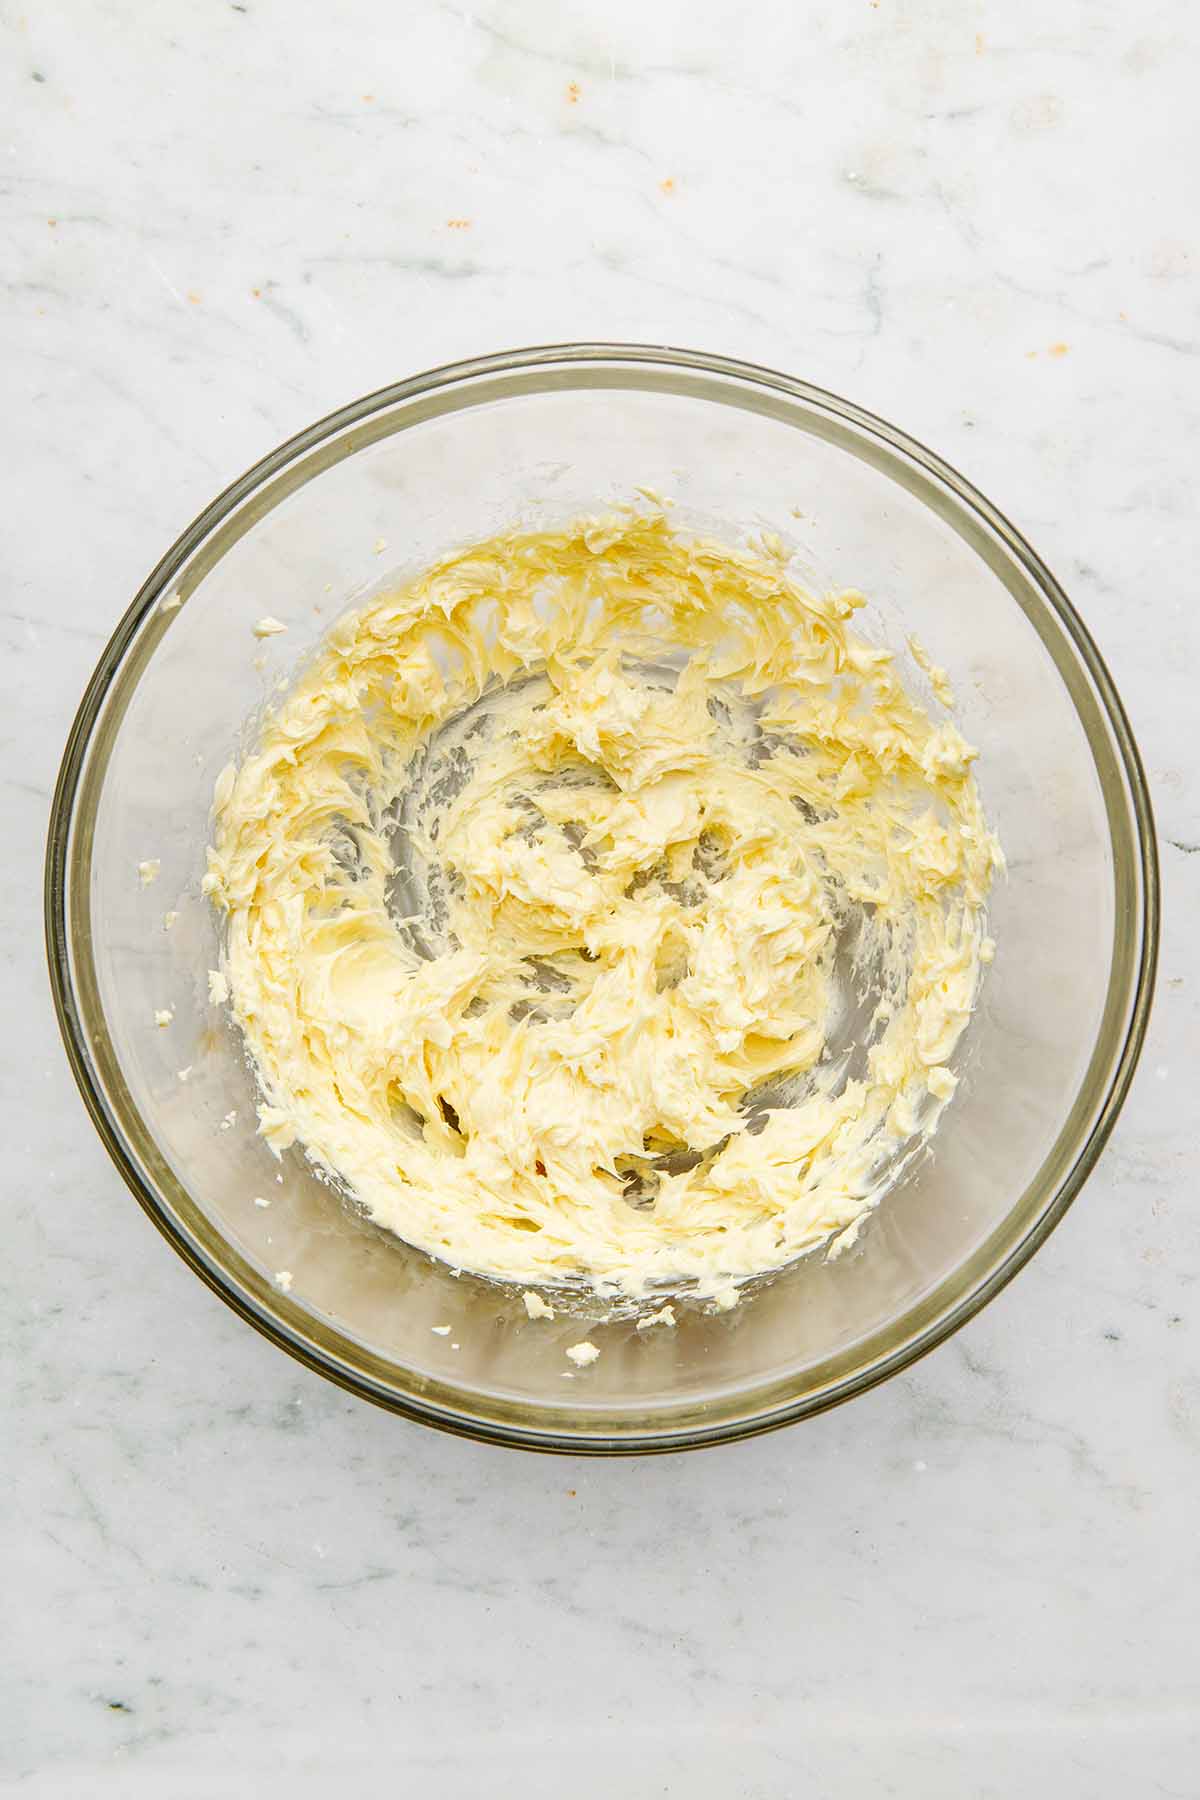 Whipped butter in a large glass bowl.